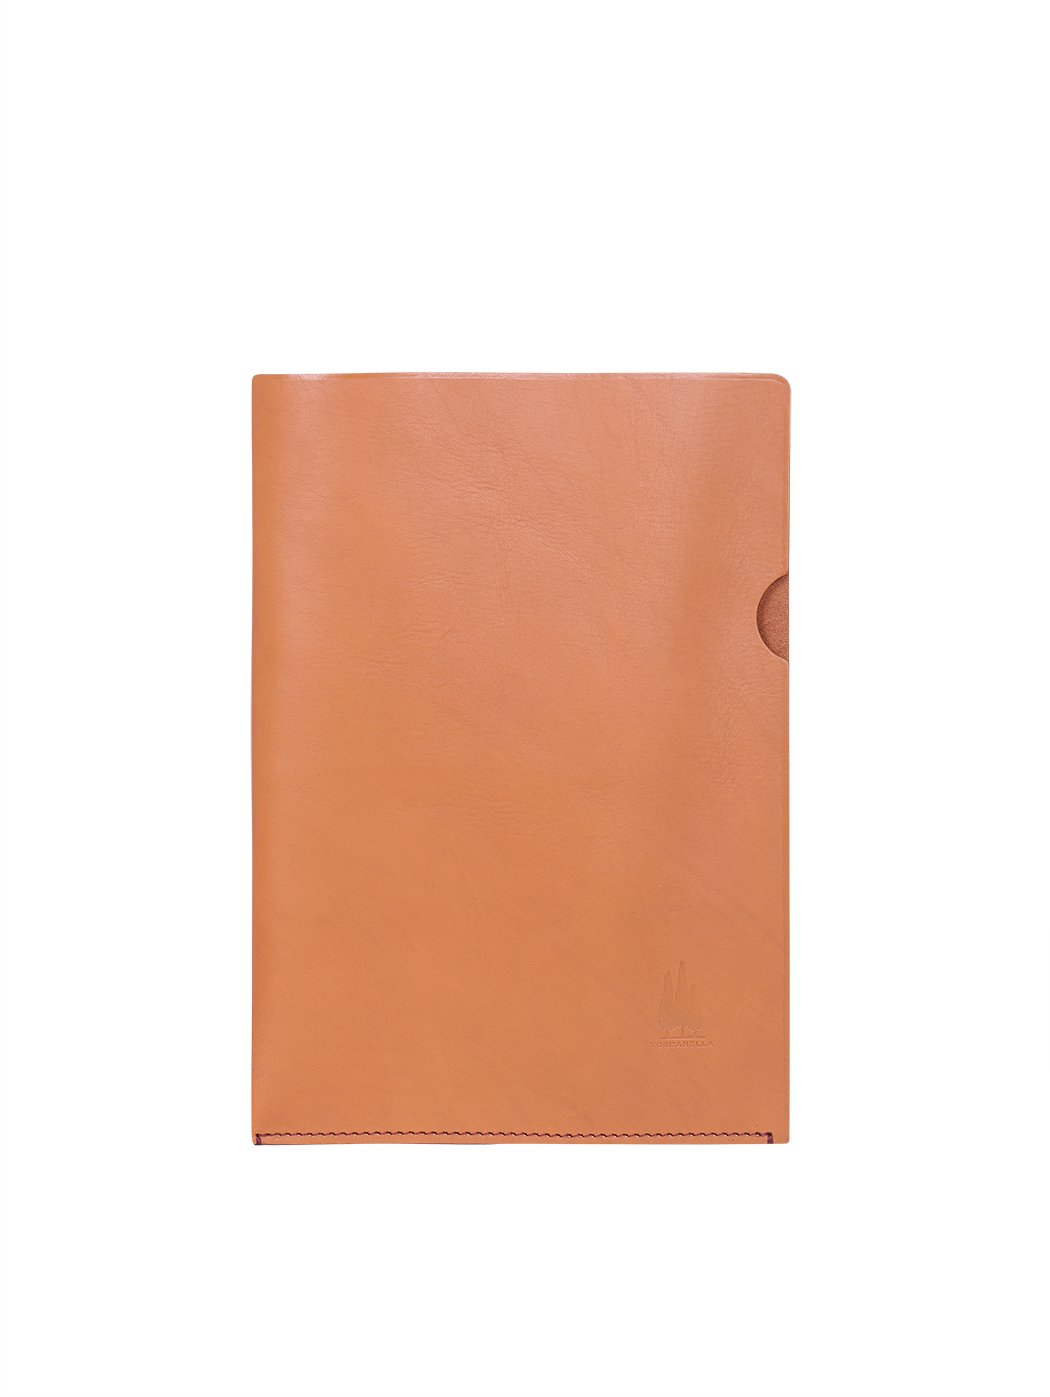 A4 Document Holder Leather Tobacco